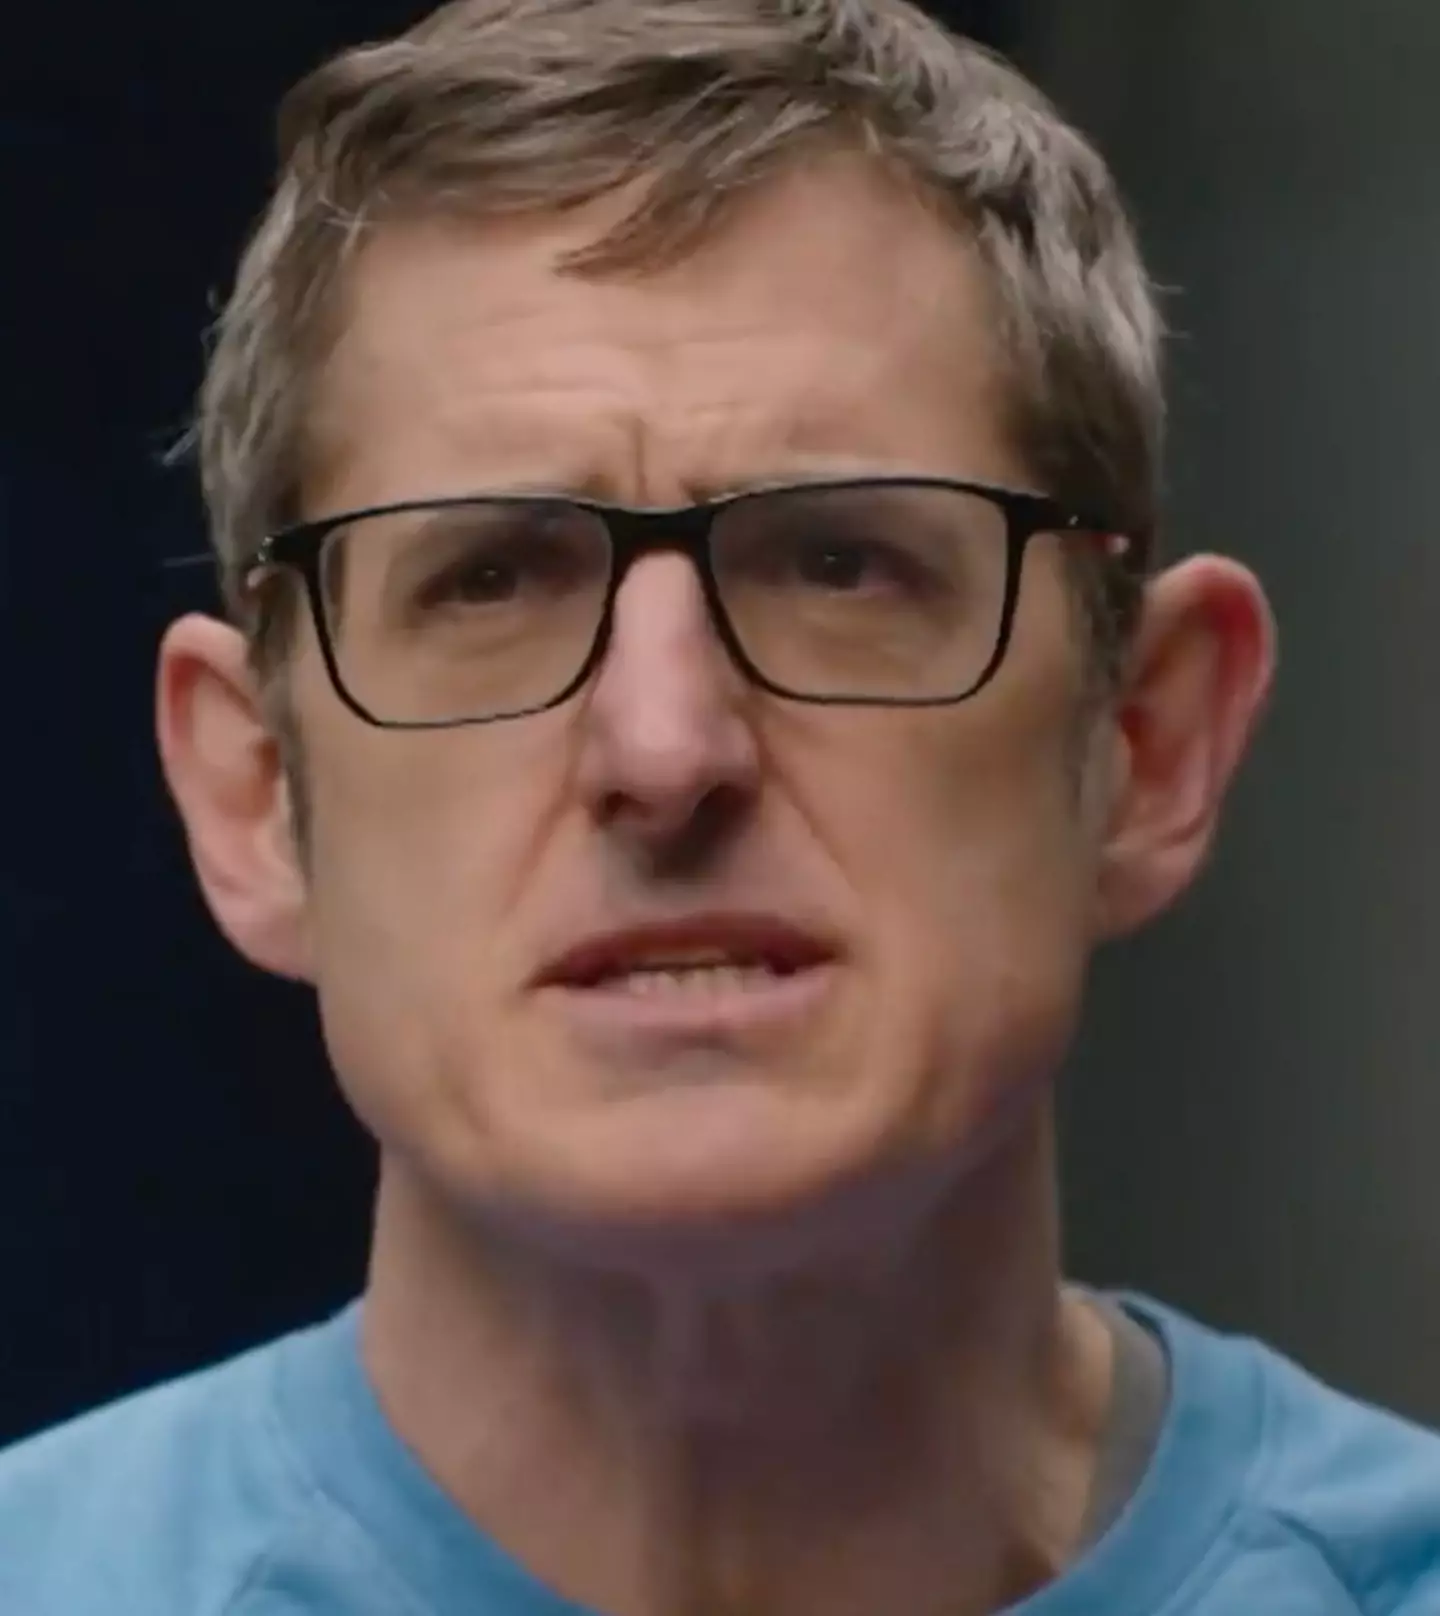 Louis Theroux says he's confident of absolutely battering Piers Morgan.